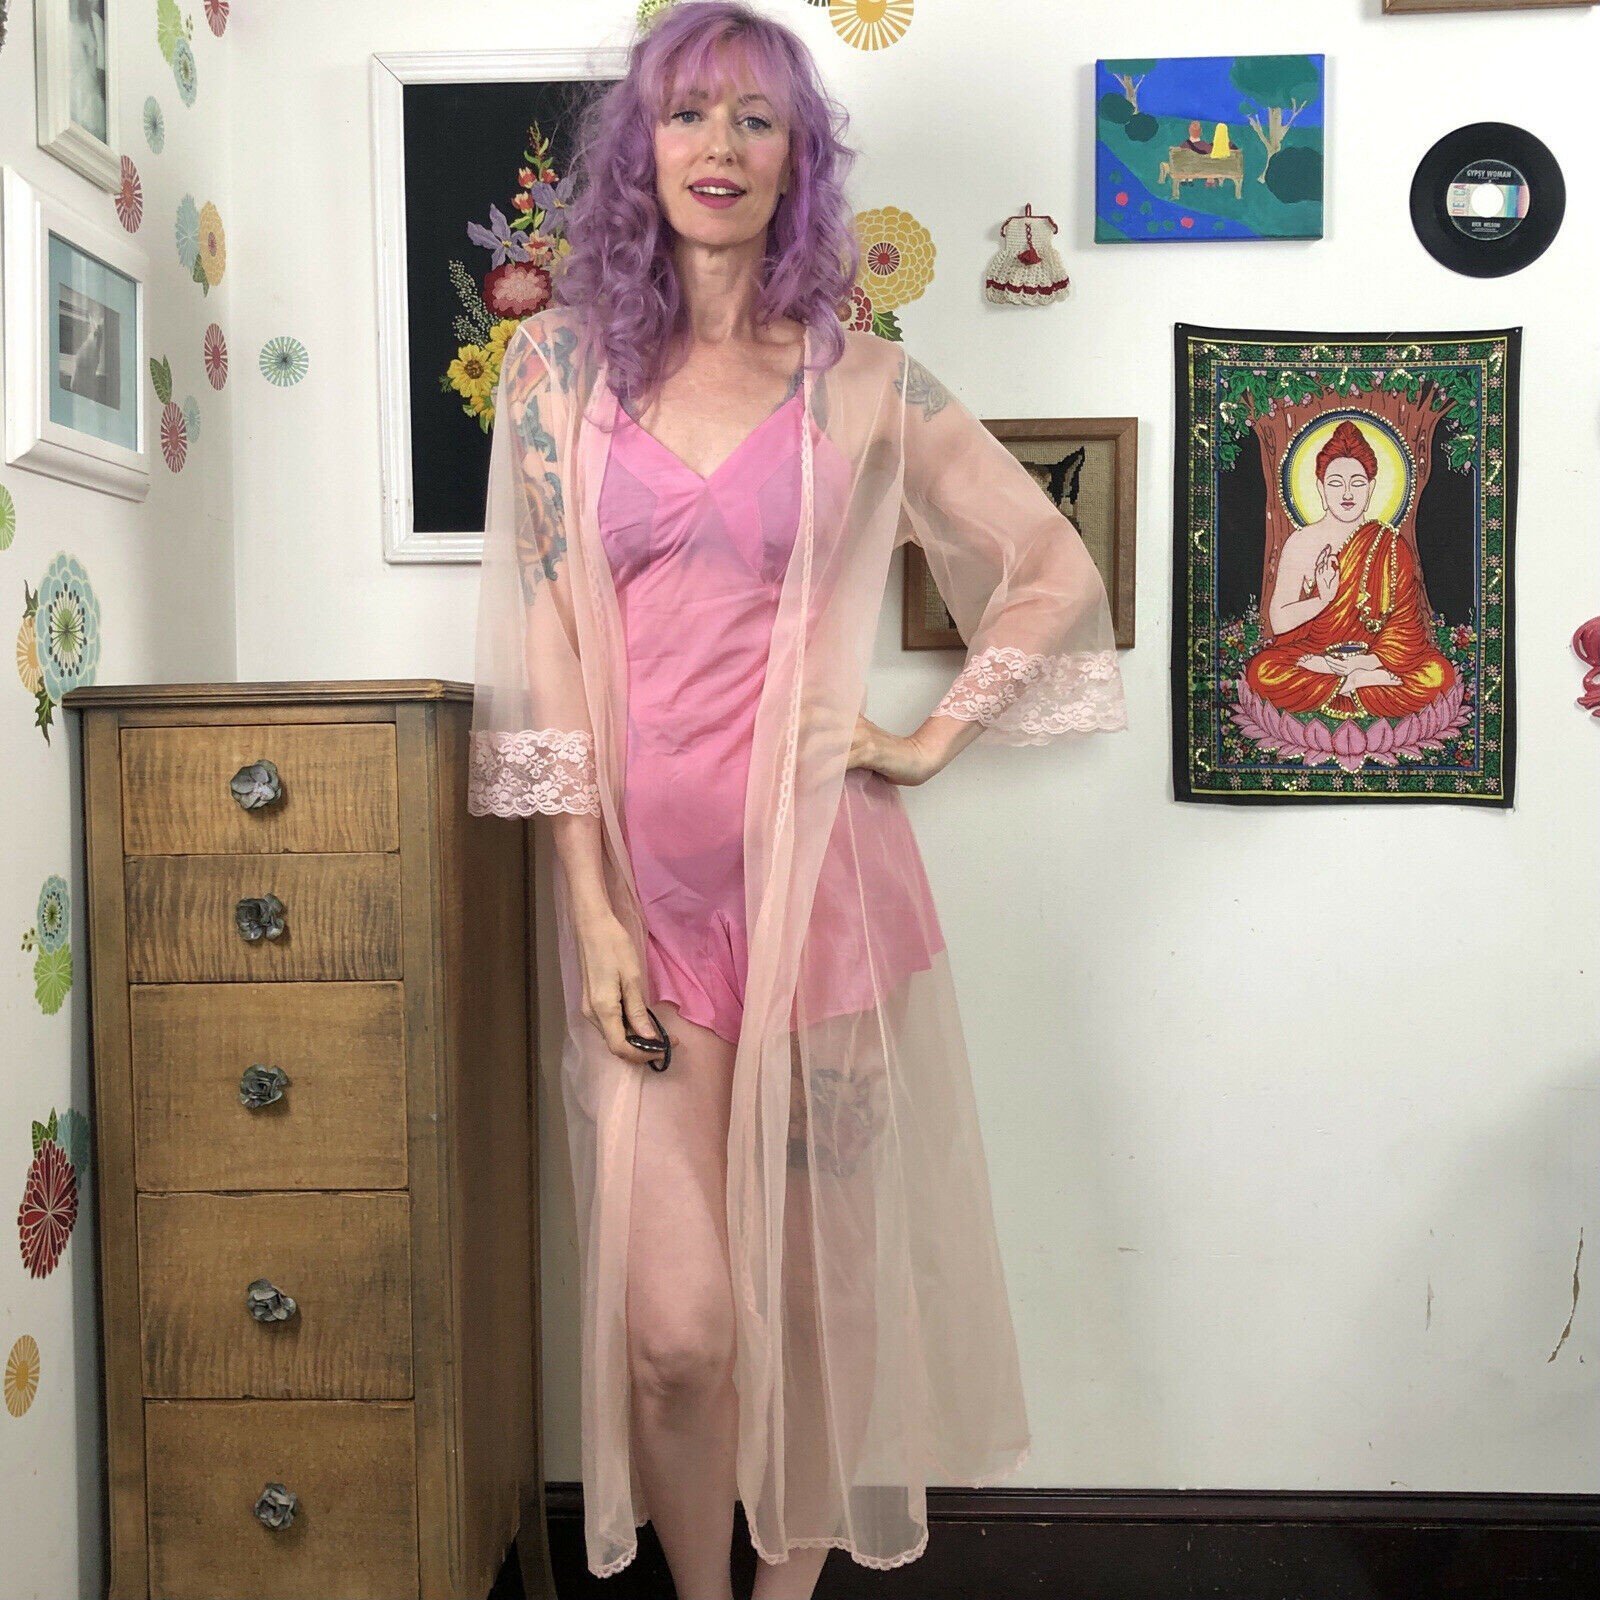 Watch the Photo by GothEis with the username @GothEis, posted on April 13, 2022. The post is about the topic Girls of Etsy. and the text says 'eBay seller "catsntatsvintage"'